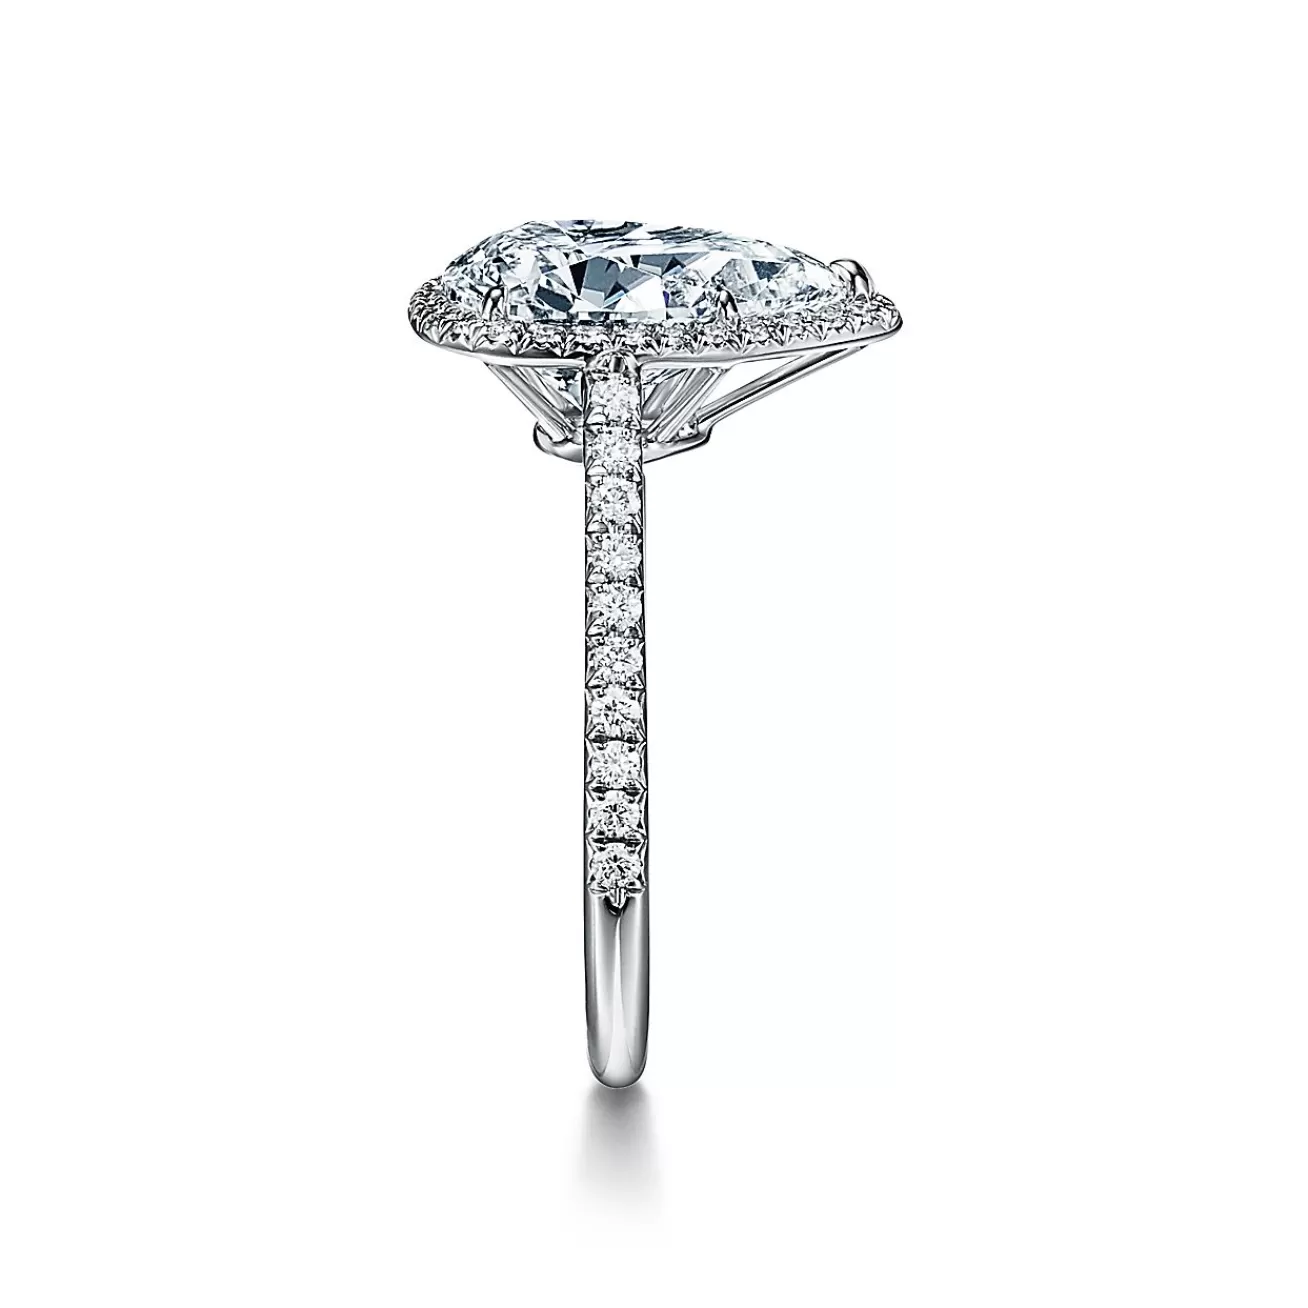 Tiffany & Co. Tiffany Soleste® pear-shaped halo engagement ring with a diamond platinum band. | ^ Engagement Rings